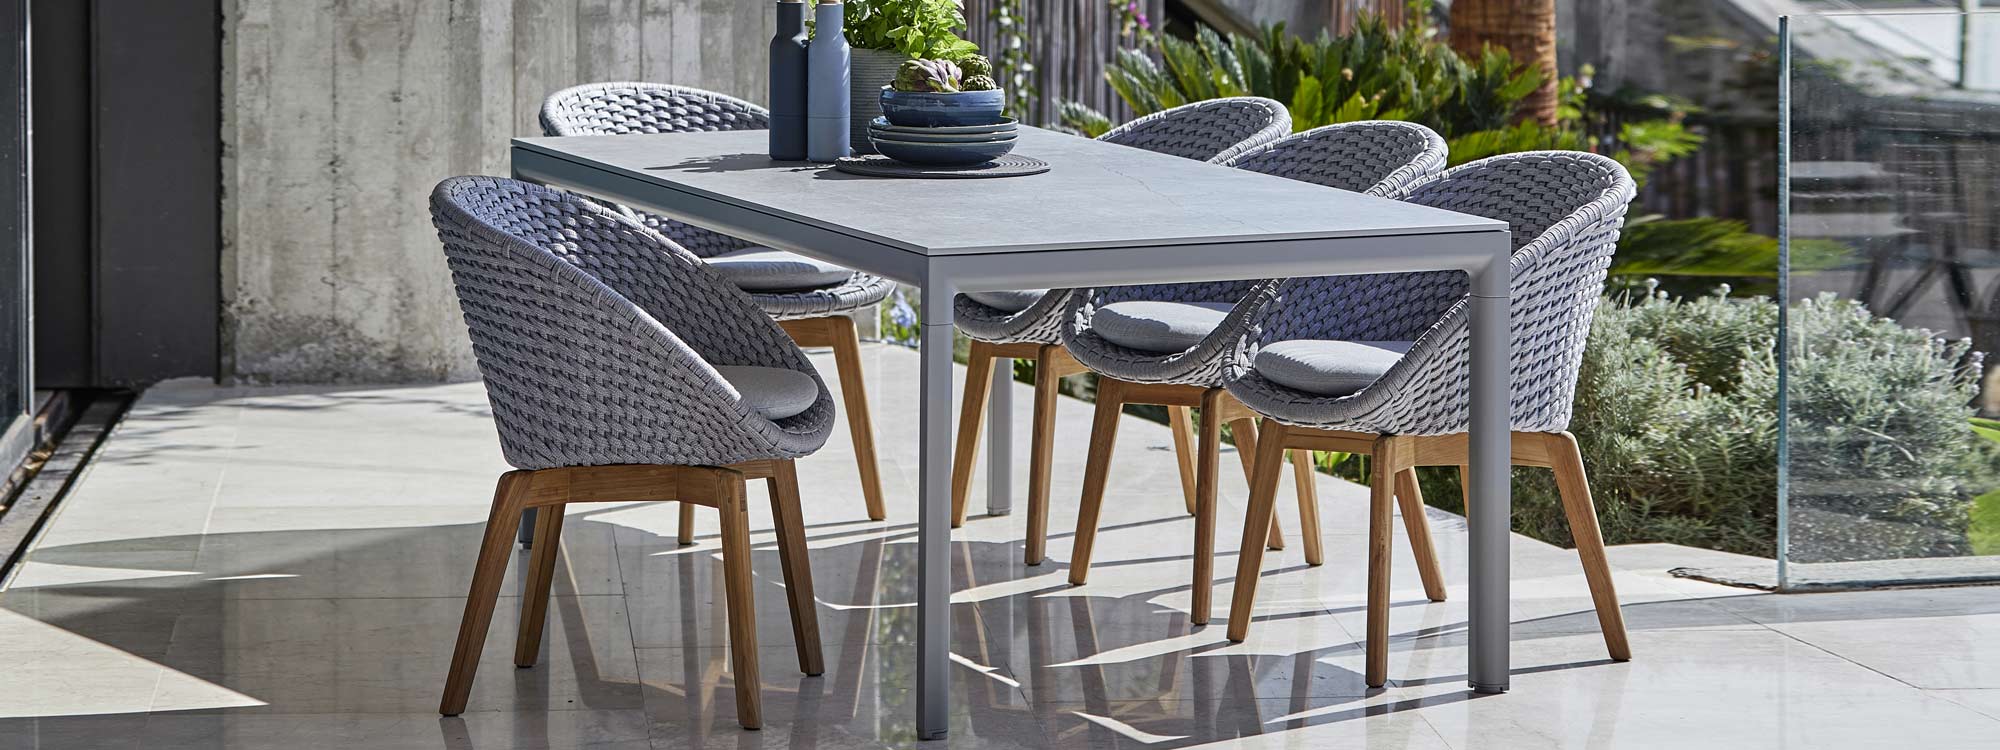 Image of light-grey Drop ceramic garden table with light-grey and teak Peacock chairs by Cane-line